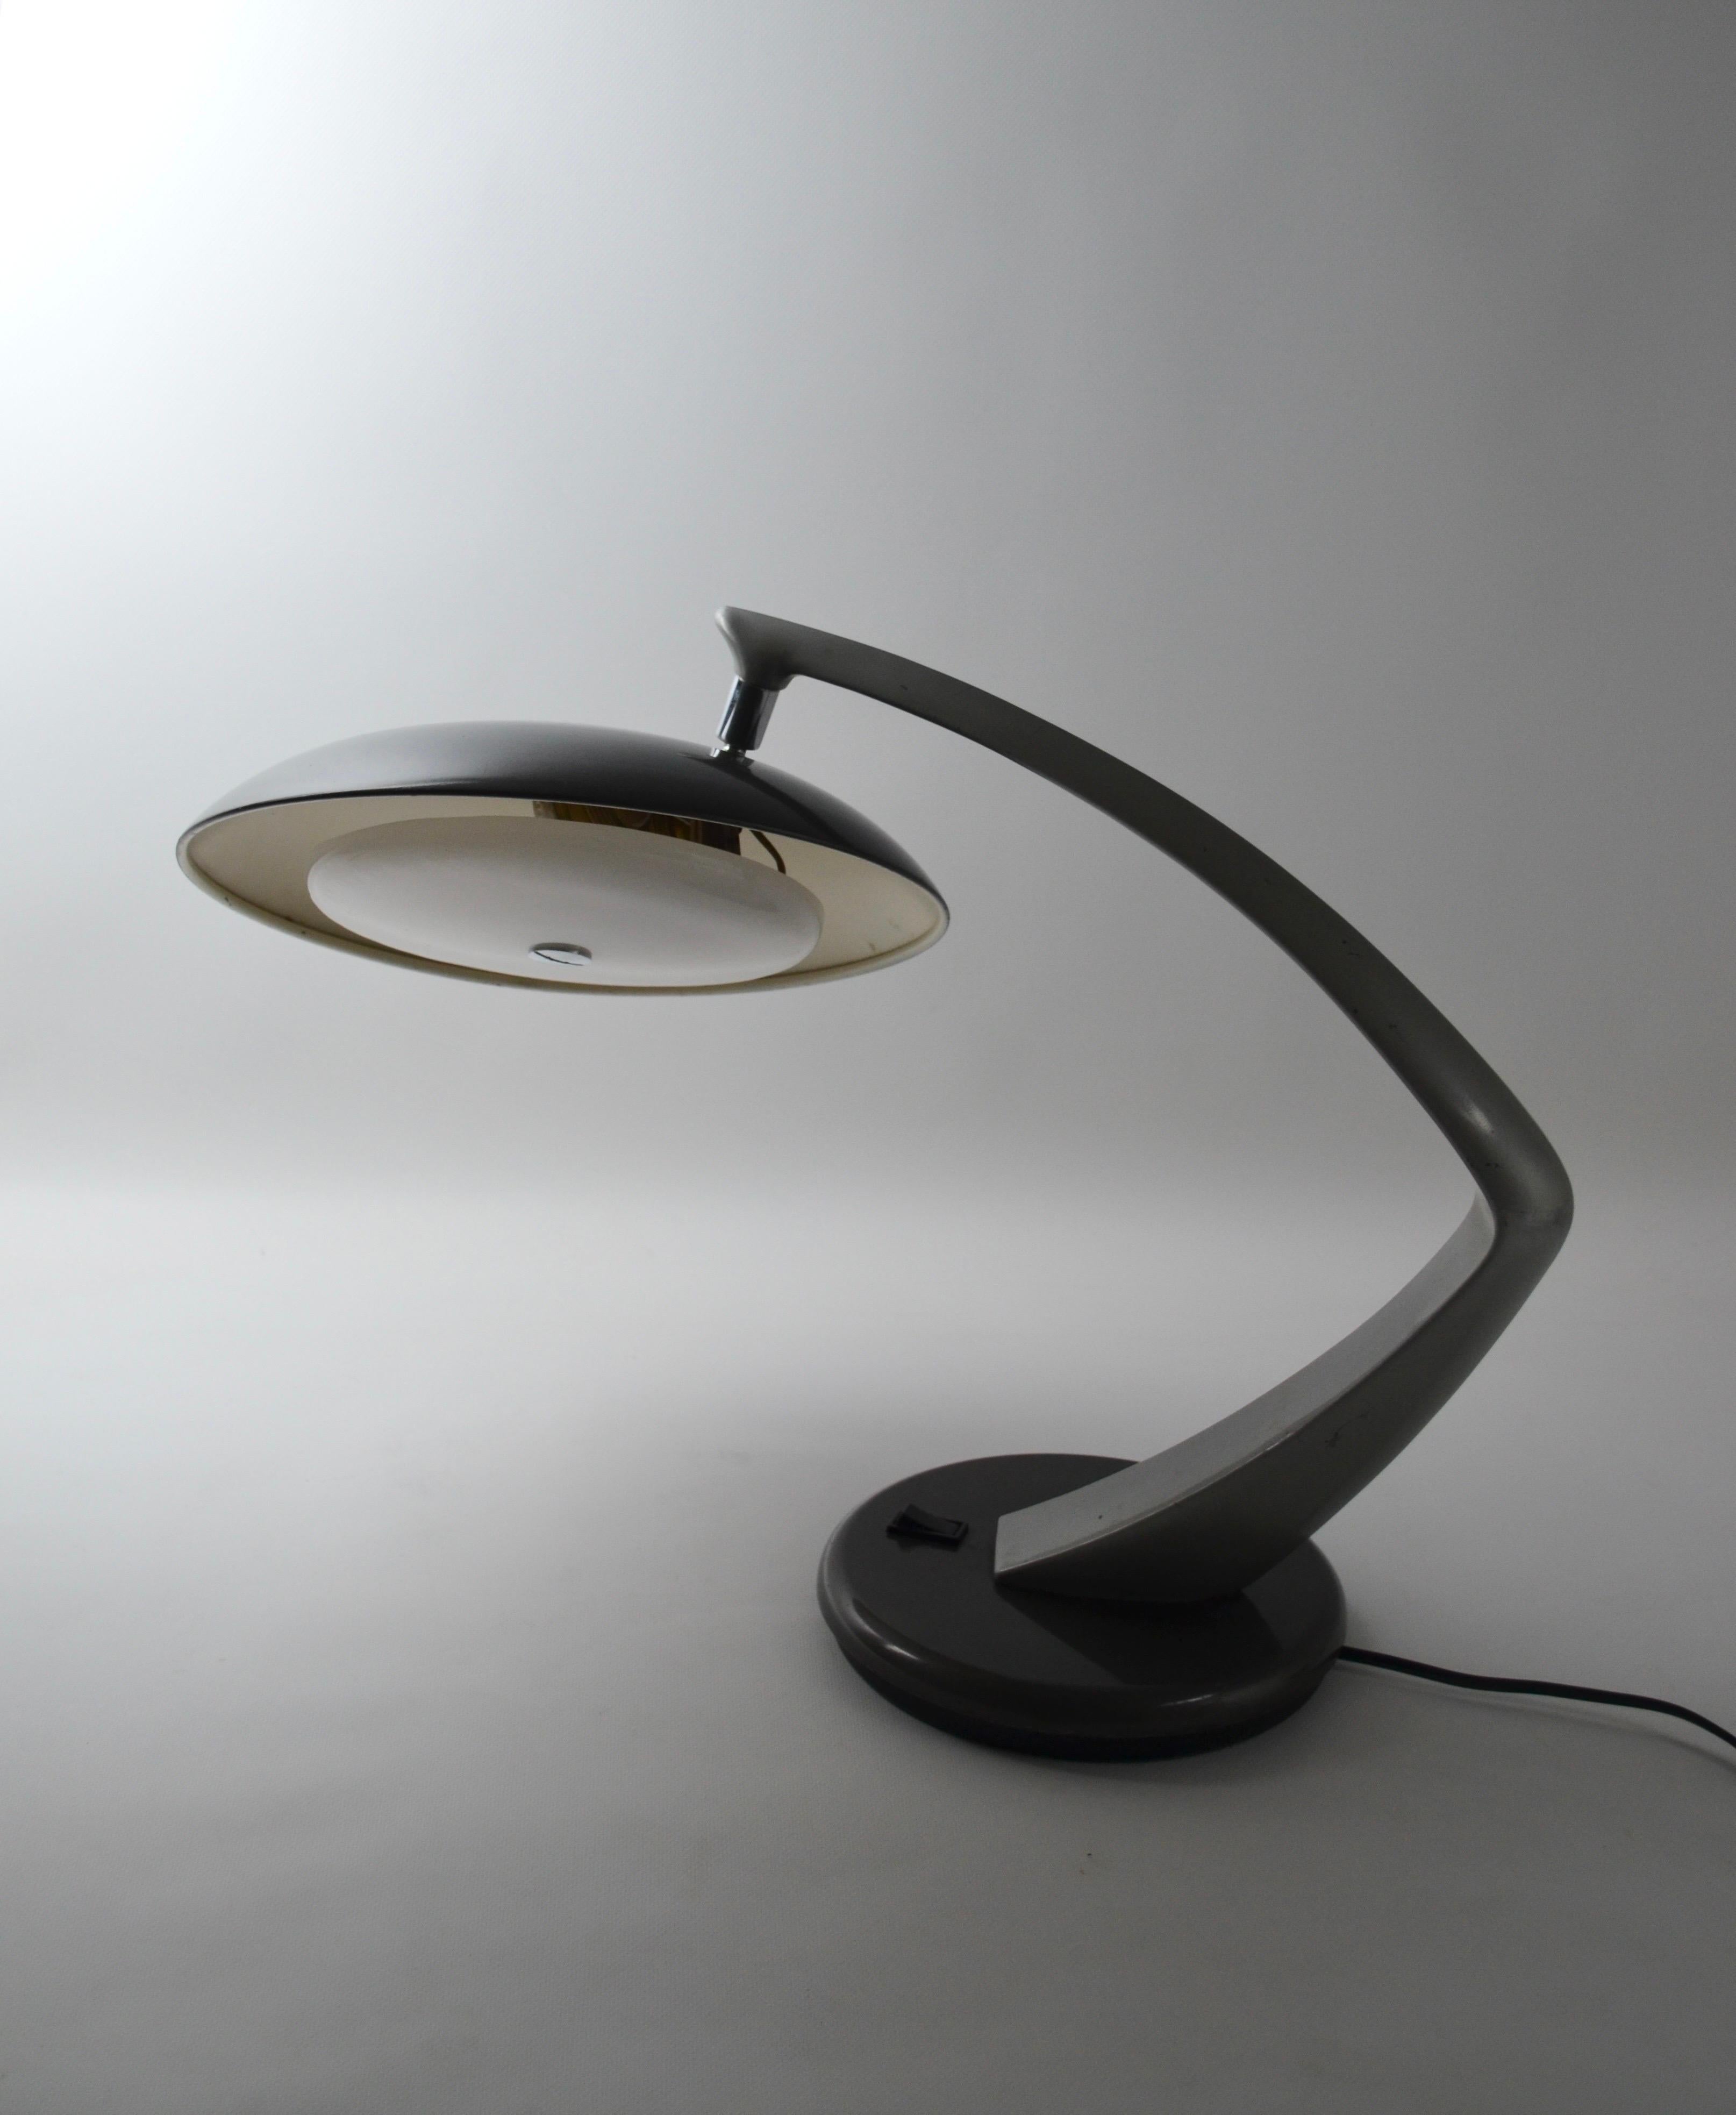 Boomerang model 64 lamp with an iconic design from the Spanish brand FASE.
Light gray and dark gray color.
Totally complete and original. Polymer diffuser present and in good condition.
The upper part is adjustable. The foot can rotate 360°.
The